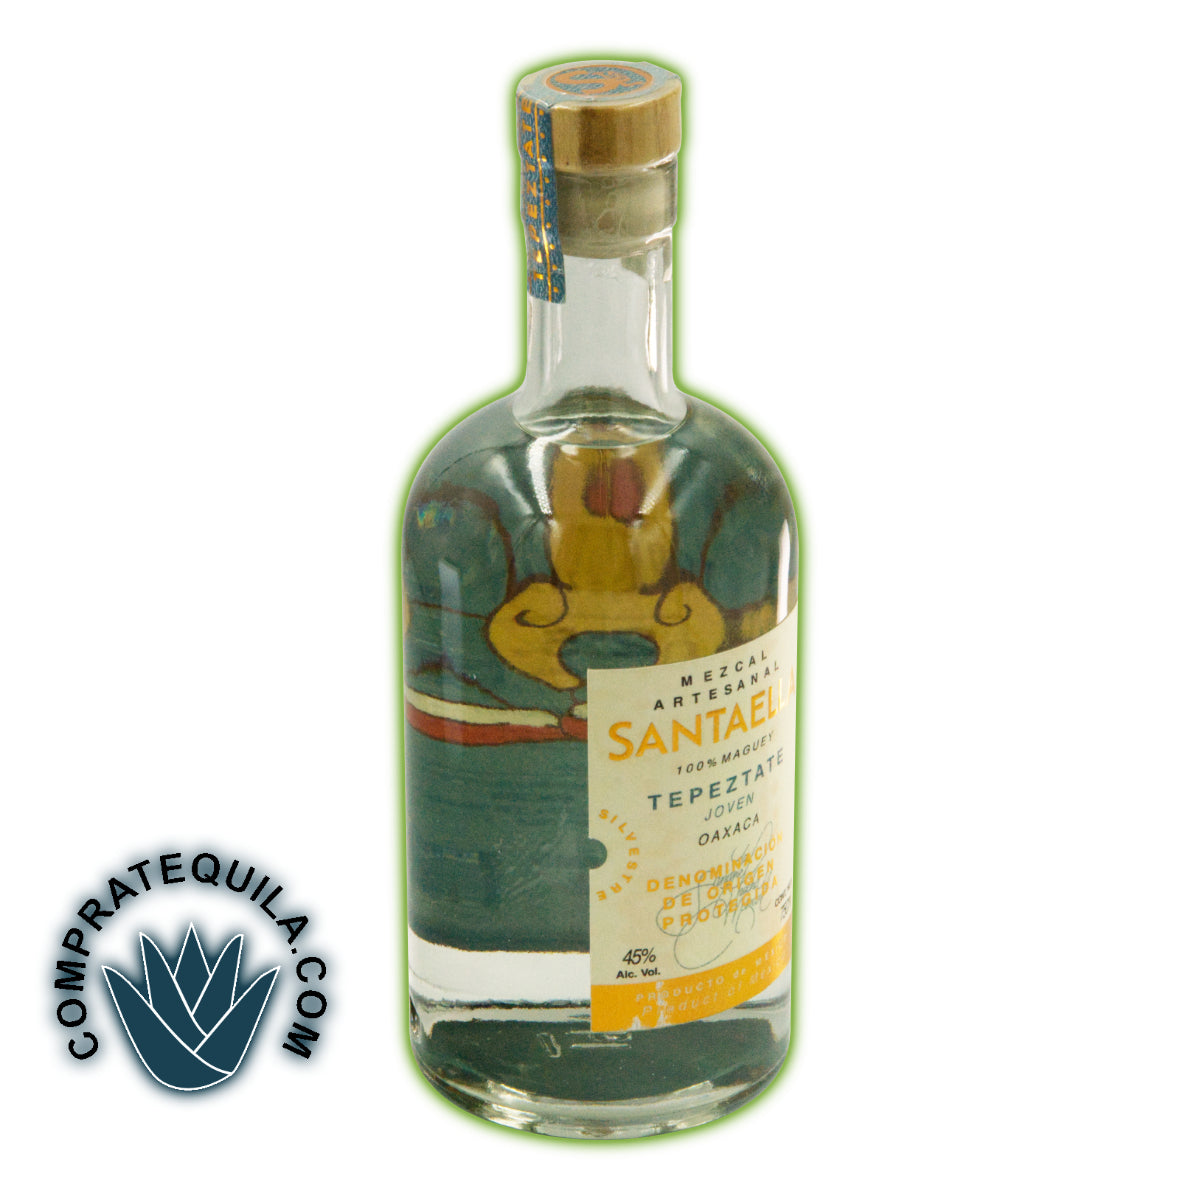 Santaella Tepeztate Mezcal: The Art of Oaxaca in a Bottle, Power and Flavor in Every Drop